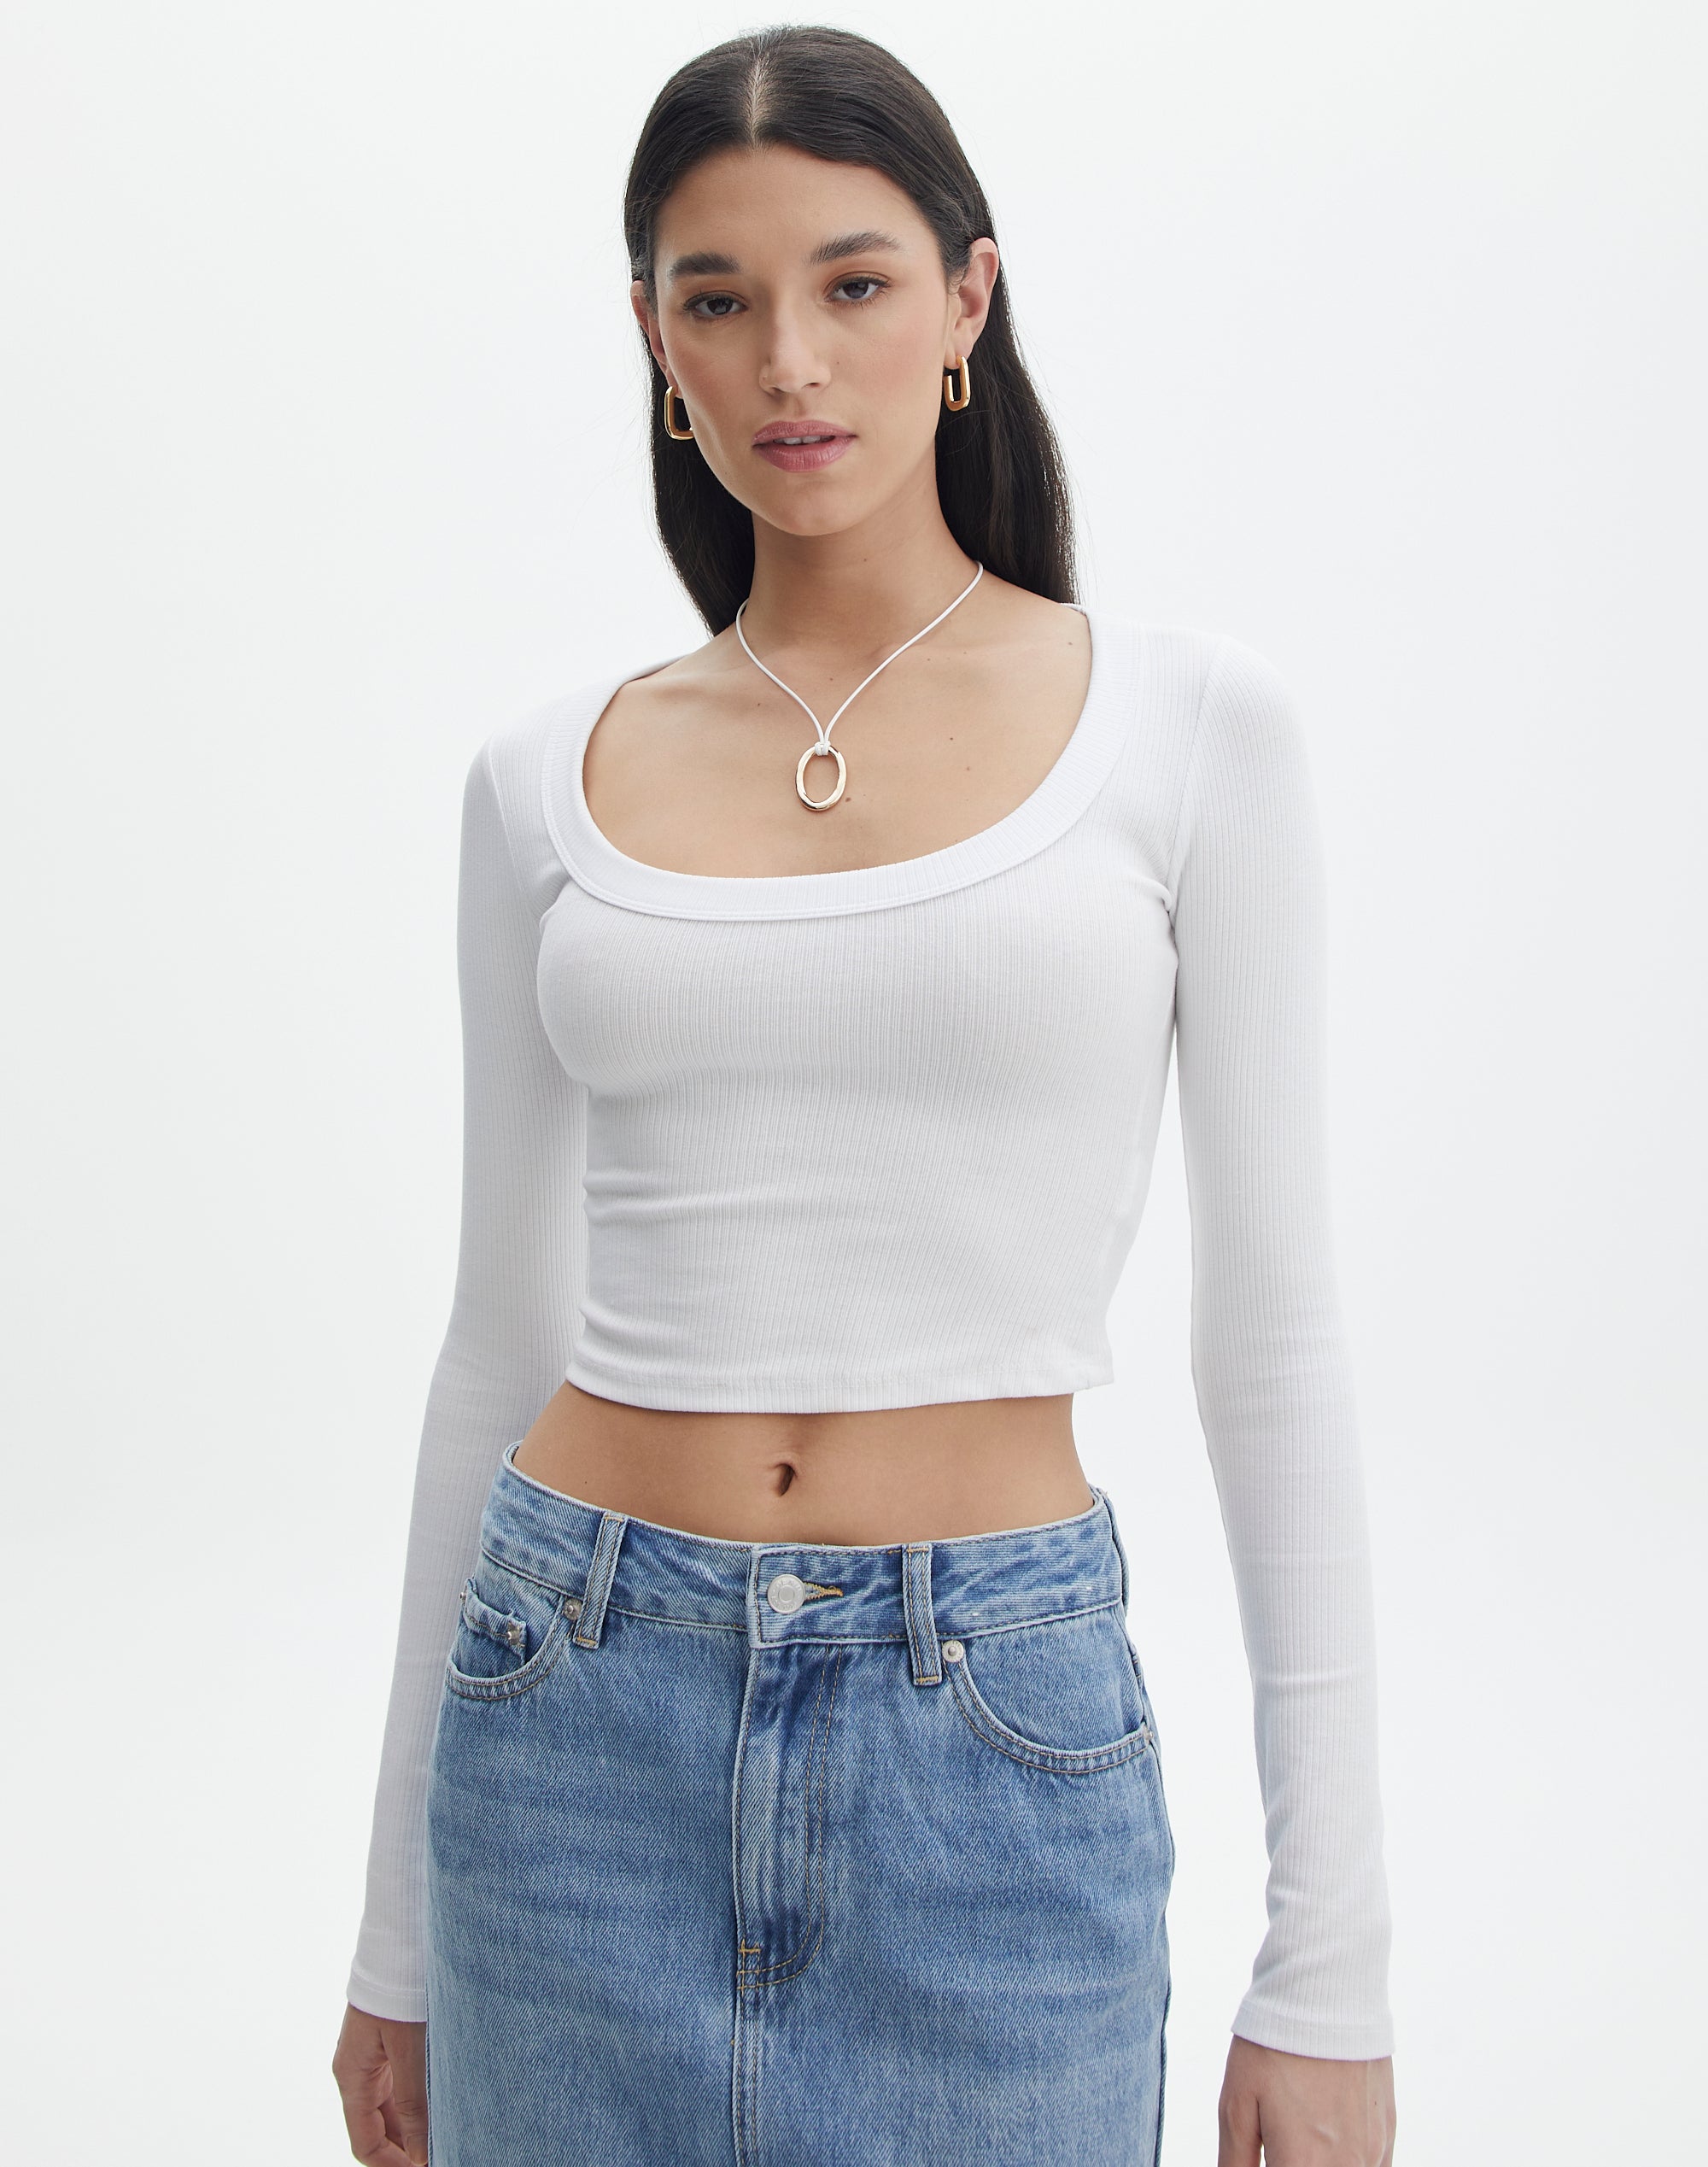 Cotton Scoop Neck Long Sleeve Top in White